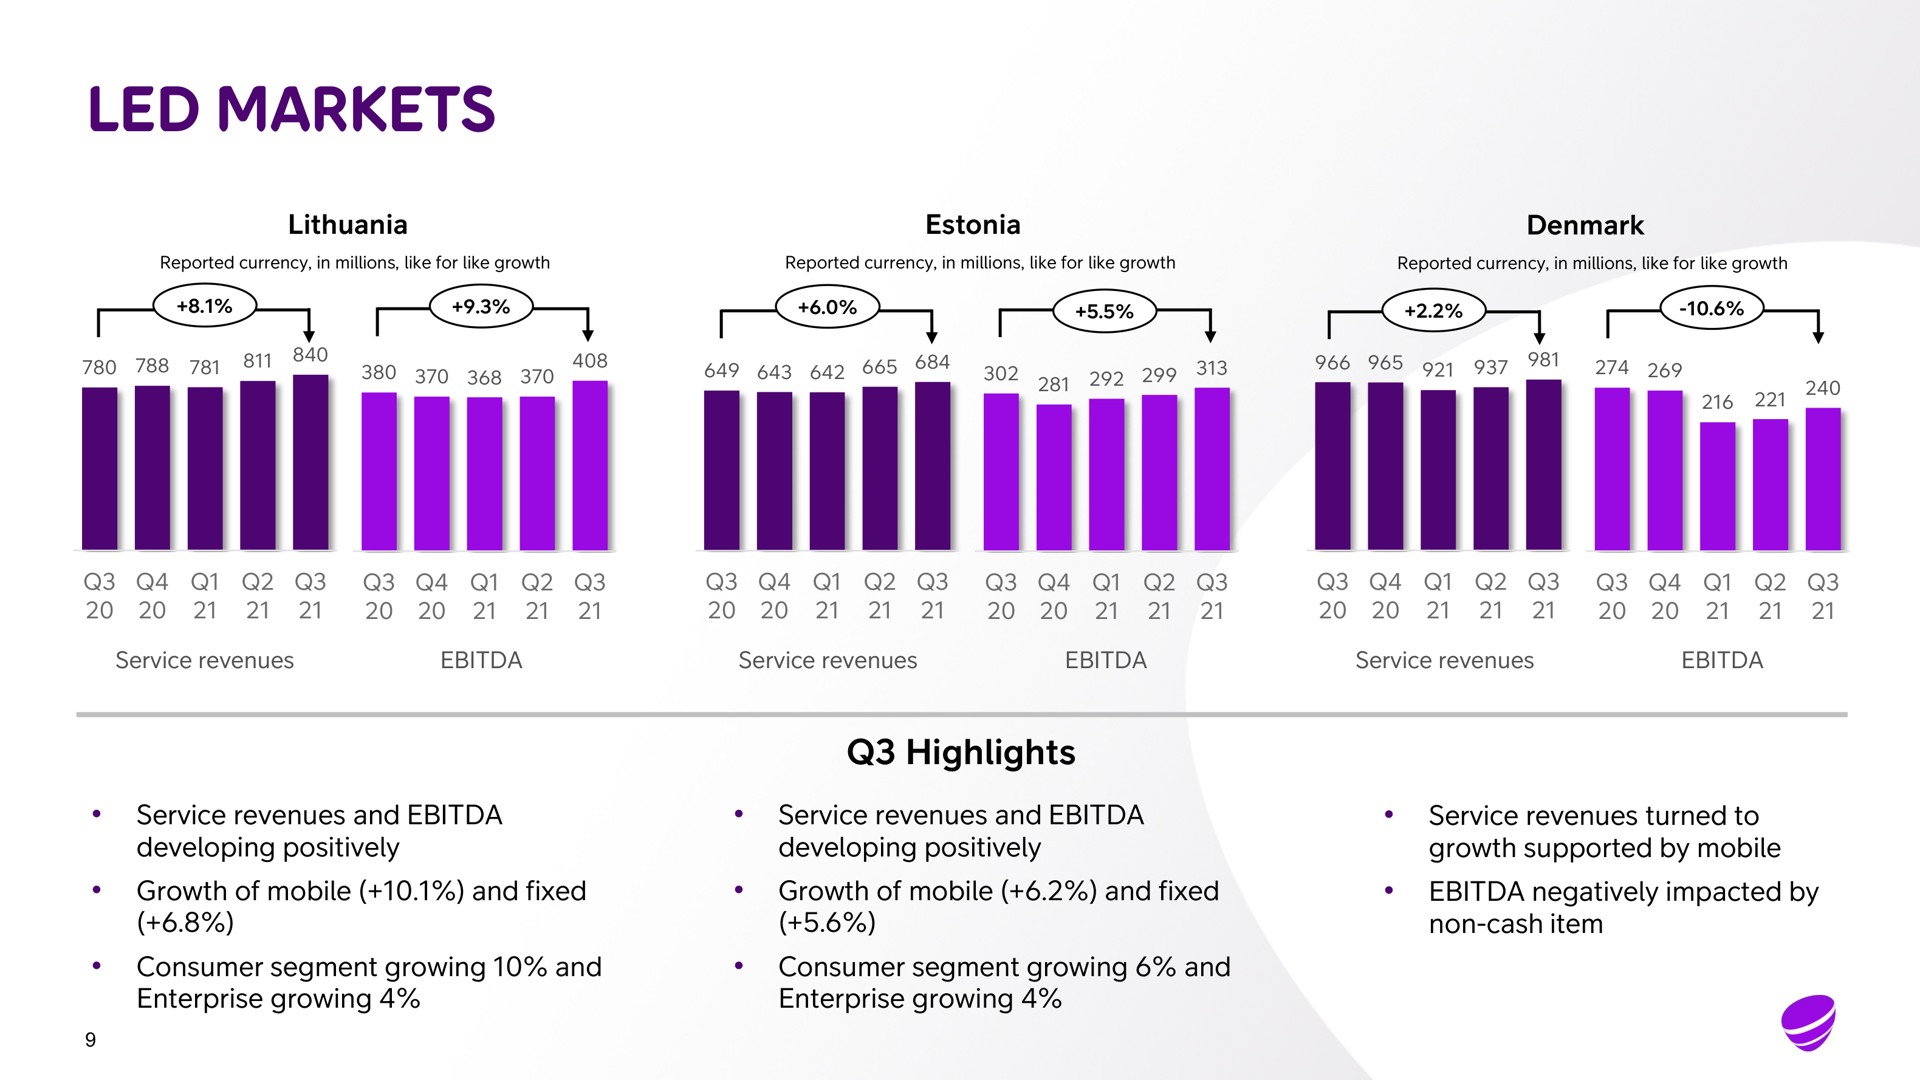 led markets highlights service revenues and developing positively service revenues and developing positively growth of mobile and fixed growth of mobile and fixed consumer segment growing and consumer segment growing and enterprise growing enterprise growing service revenues turned to growth supported by mobile negatively impacted by non cash item | Telia Company